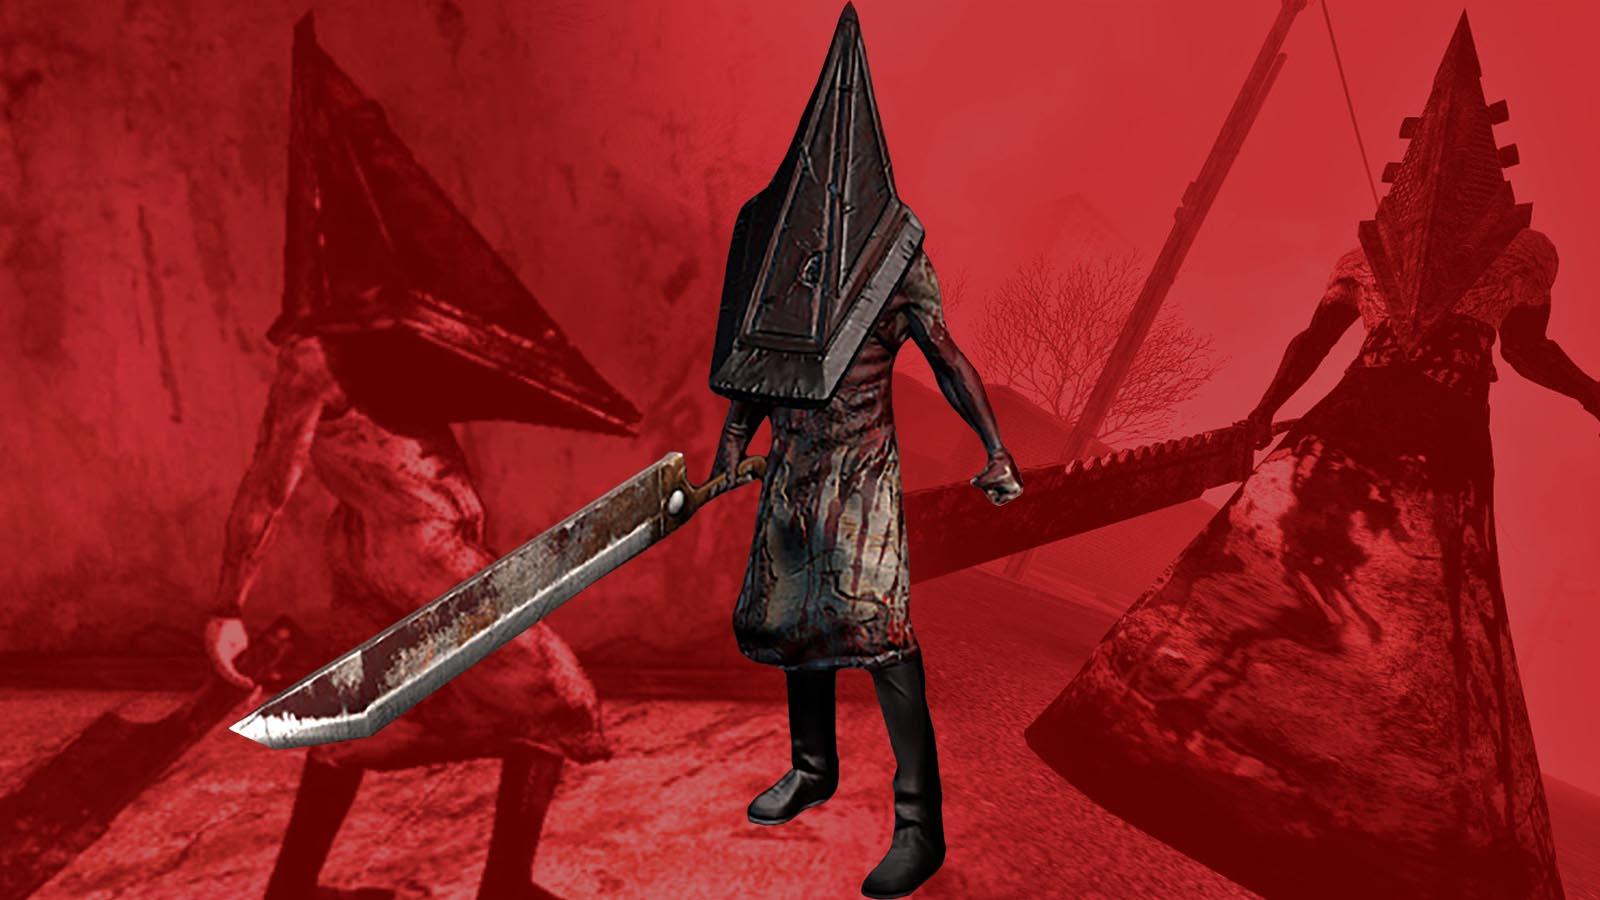 Why Pyramid Head's Designer Wants The Alternate Version To Be Used More